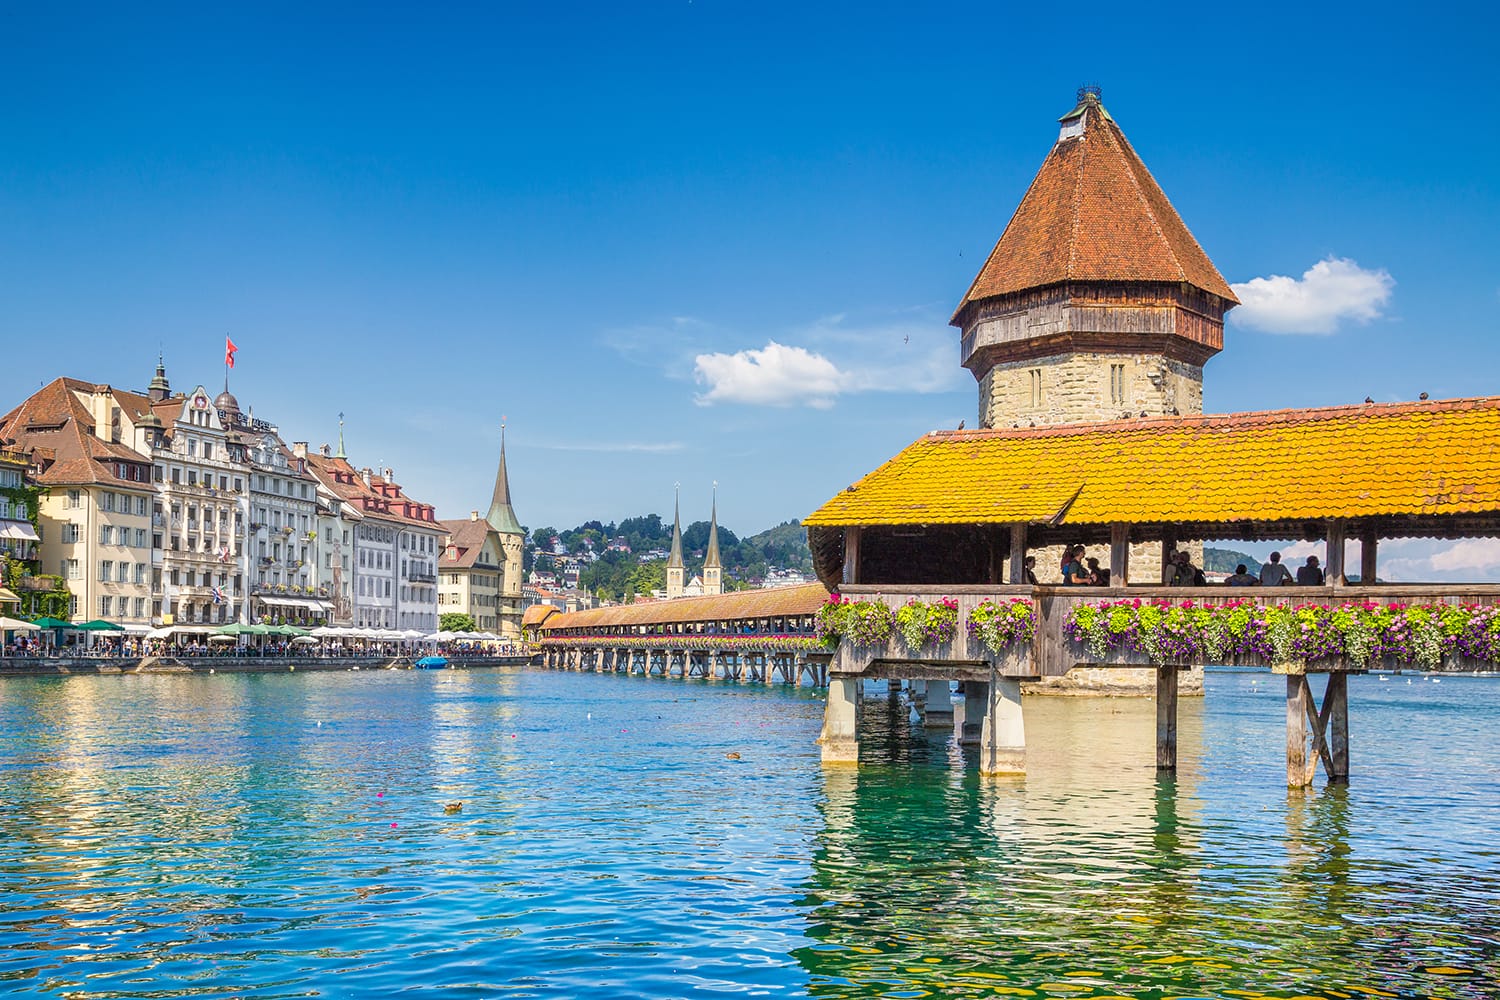 Famous Chapel Bridge in the historic city center of Lucerne, the city's symbol and one of Switzerland's main tourist attractions and views on a sunny day in summer, Canton of Lucerne, Switzerland